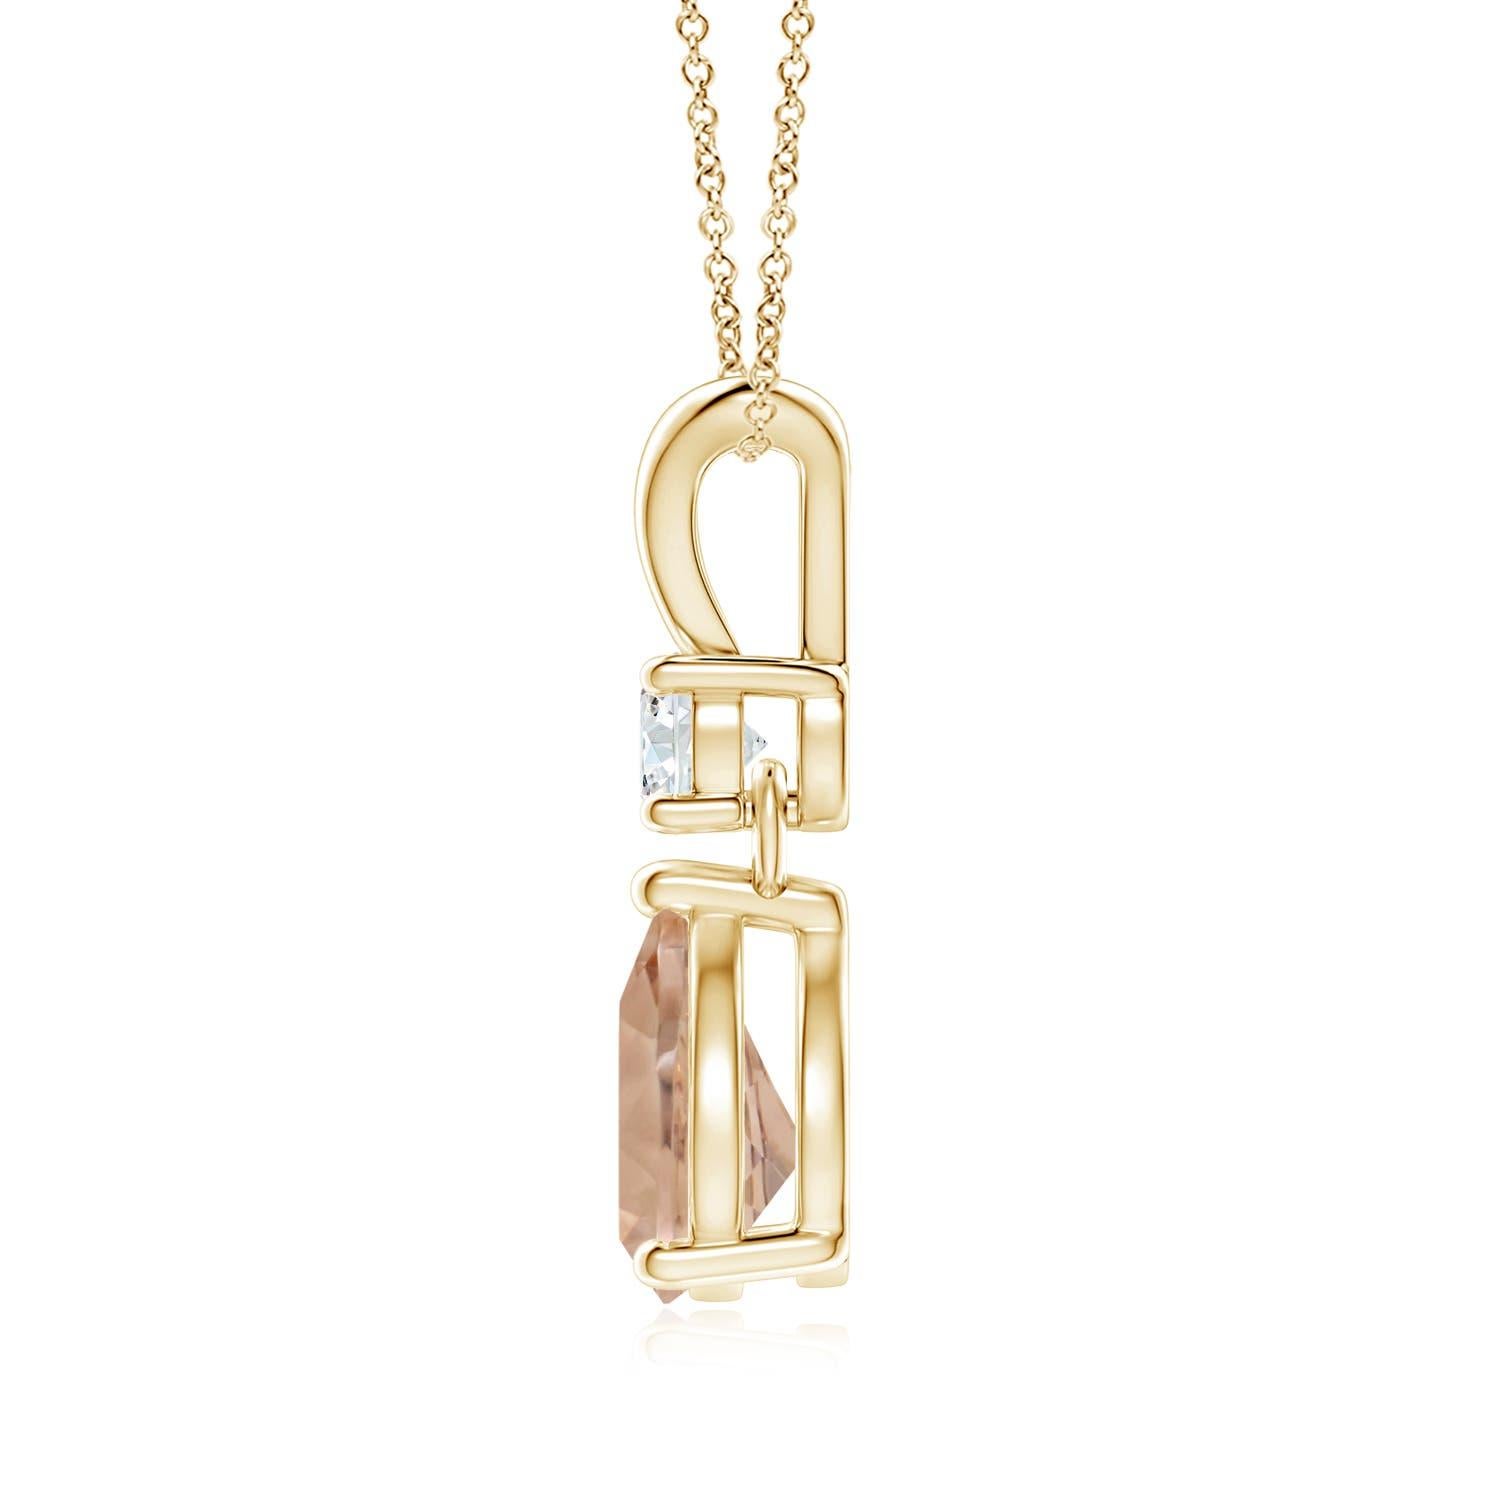 The GIA certified pear-shaped morganite is mounted in a prong setting. It is topped with a sparkling diamond and linked to a stylish V-bale. This 18k yellow gold pendant has an unmissable feminine flair.
